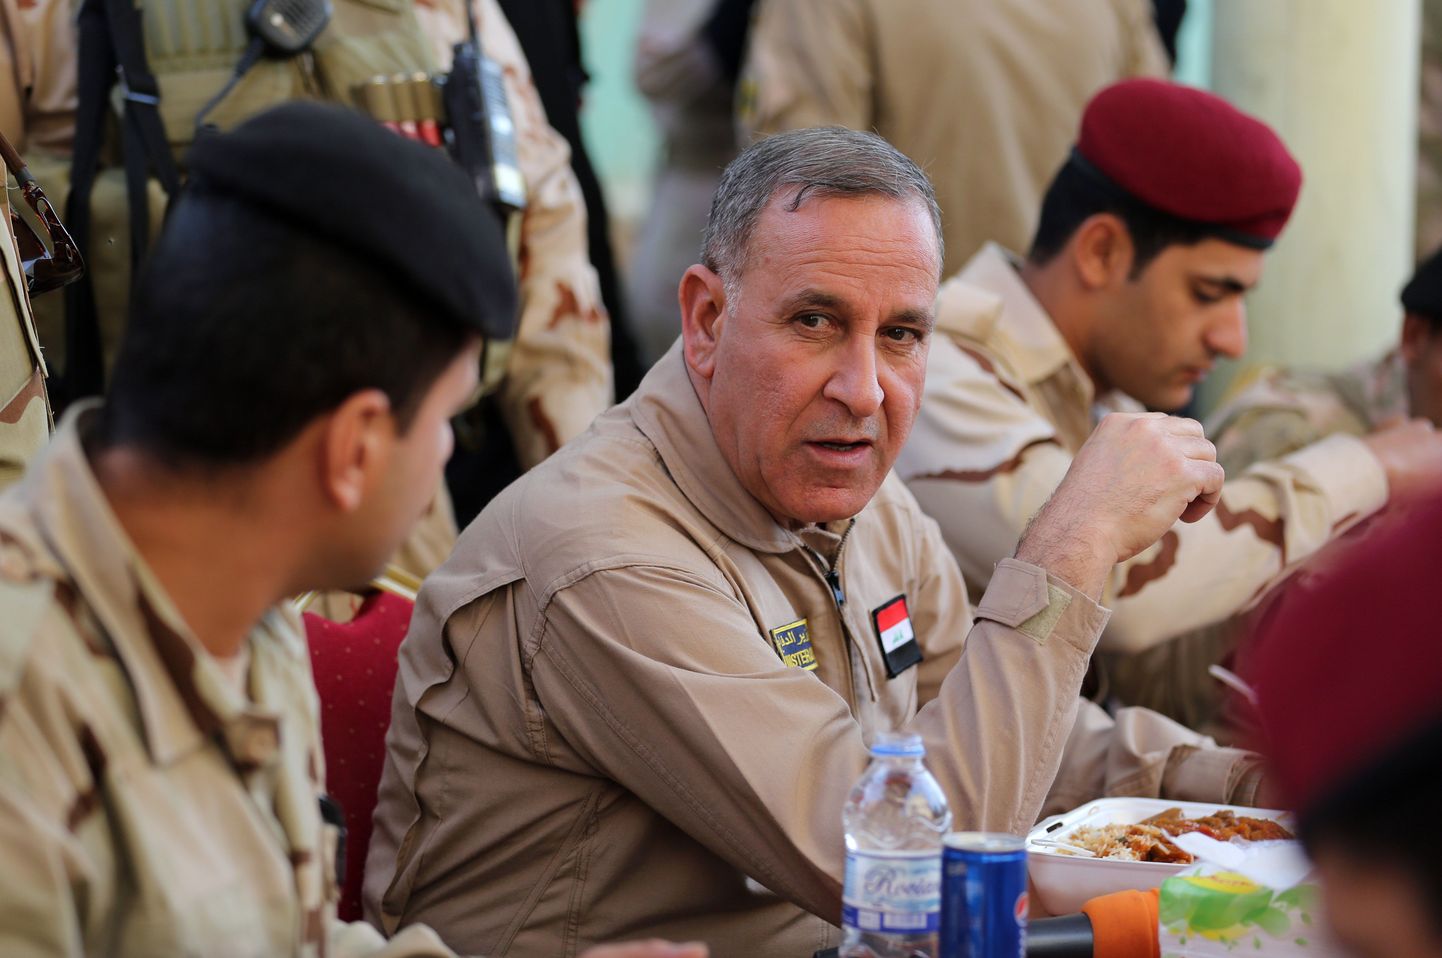 Iraqi Defense Minister Khalid al-Obeidi,  center, speaks to his soldiers at a military base in Tikrit, 80 miles (130 kilometers) north of Baghdad, Iraq, Monday, Dec. 8, 2014. The commander of U.S. forces fighting the Islamic State in Iraq and Syria, Army Lt. Gen. James Terry says the extremist group has been thrown on the defensive, because coalition airstrikes and other measures are taking a toll on IS ability to communicate. (AP Photo/Hadi Mizban)